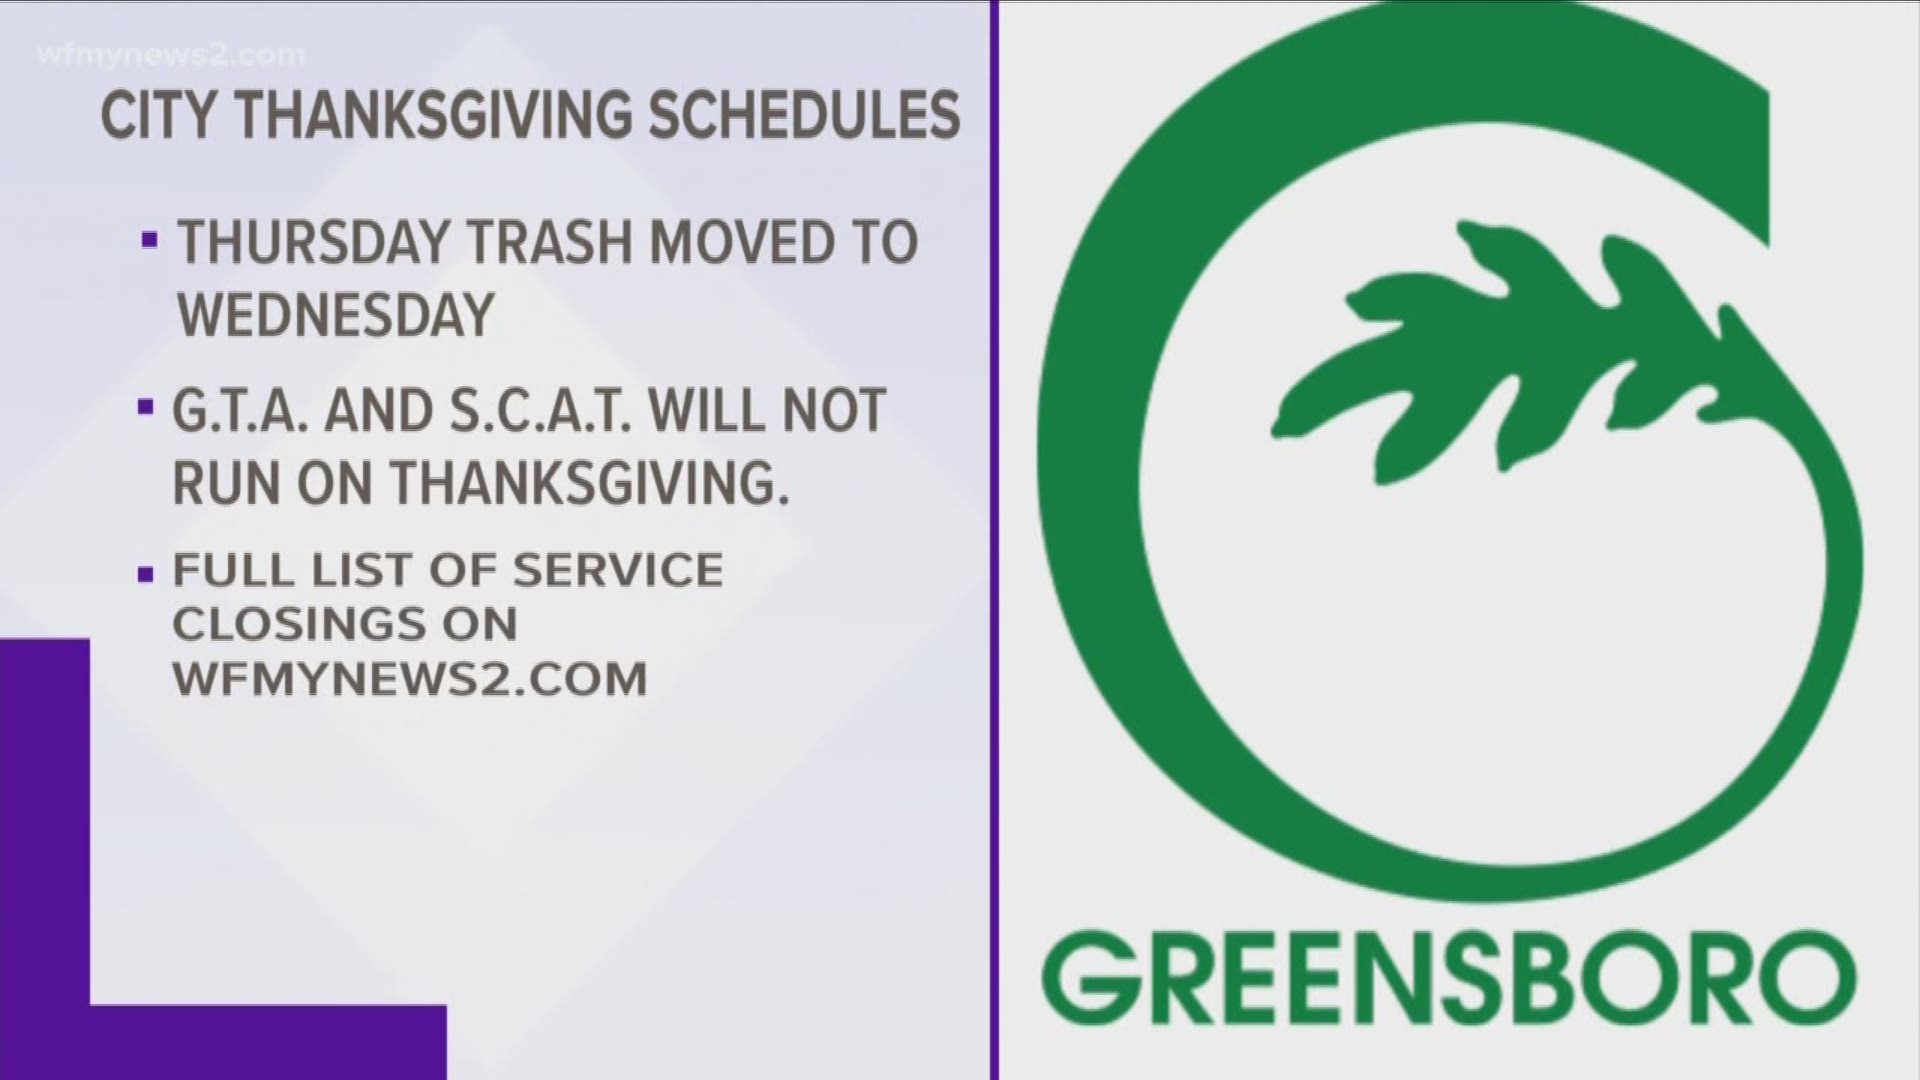 GSO offices will be closed on Thanksgiving, and other services have changed their schedule around